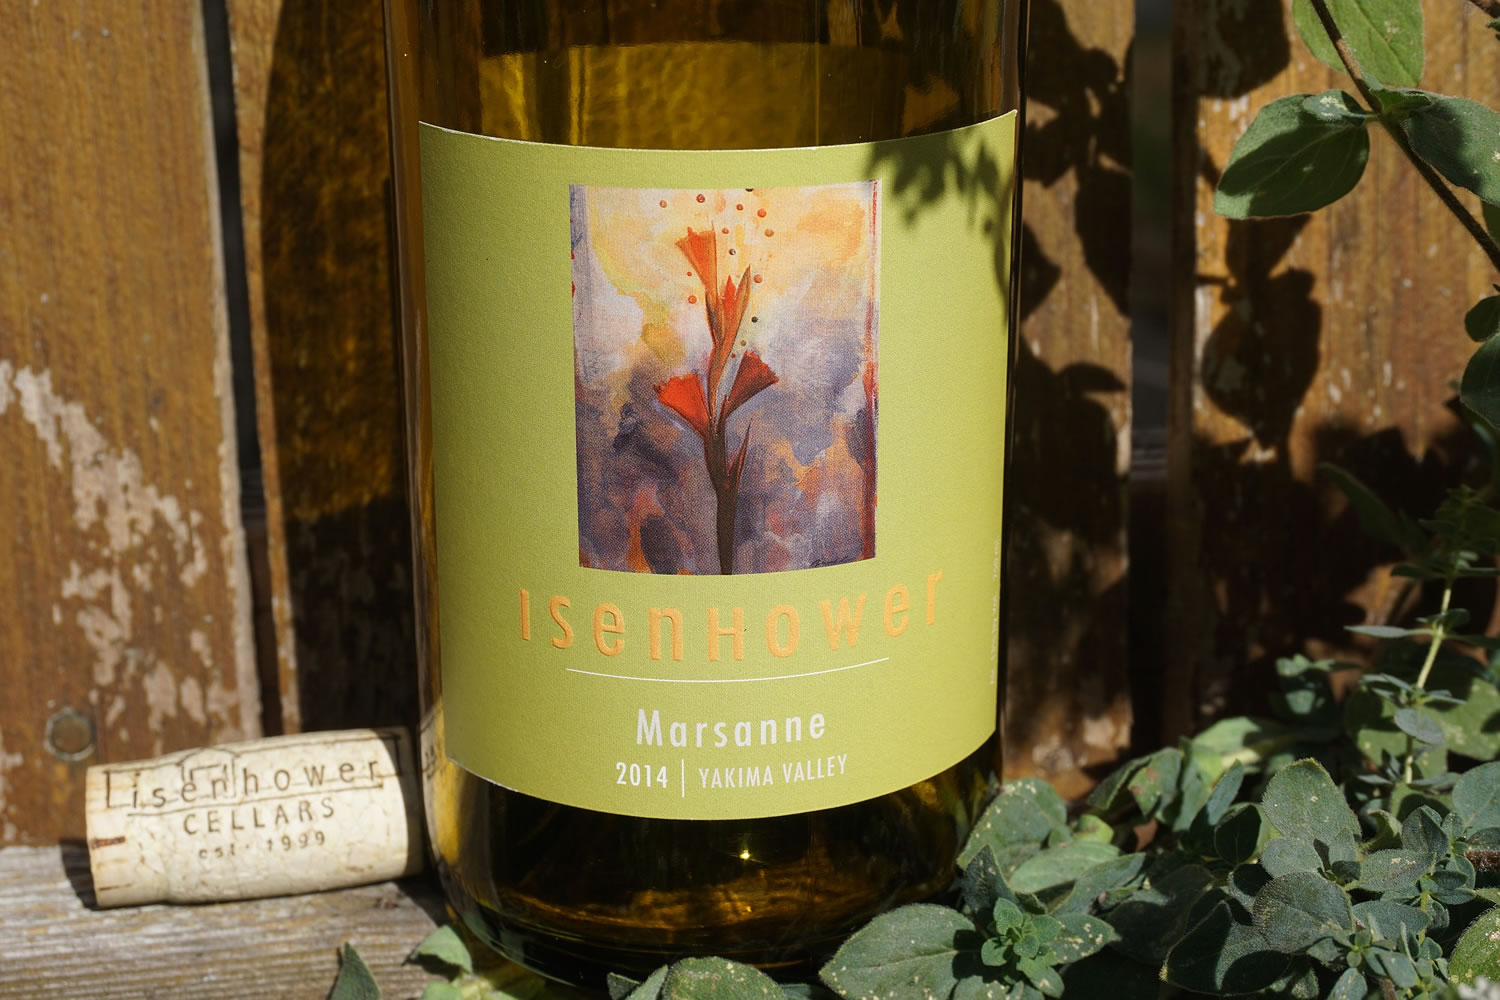 Viki Eierdam
Isenhower Cellars Yakima Valley 2014 Marsanne is a unique blend to substitute for a more commonly drunk varietal, such as chardonnay. The addition of roussanne and viognier solidify it as a Rh?ne-style wine.